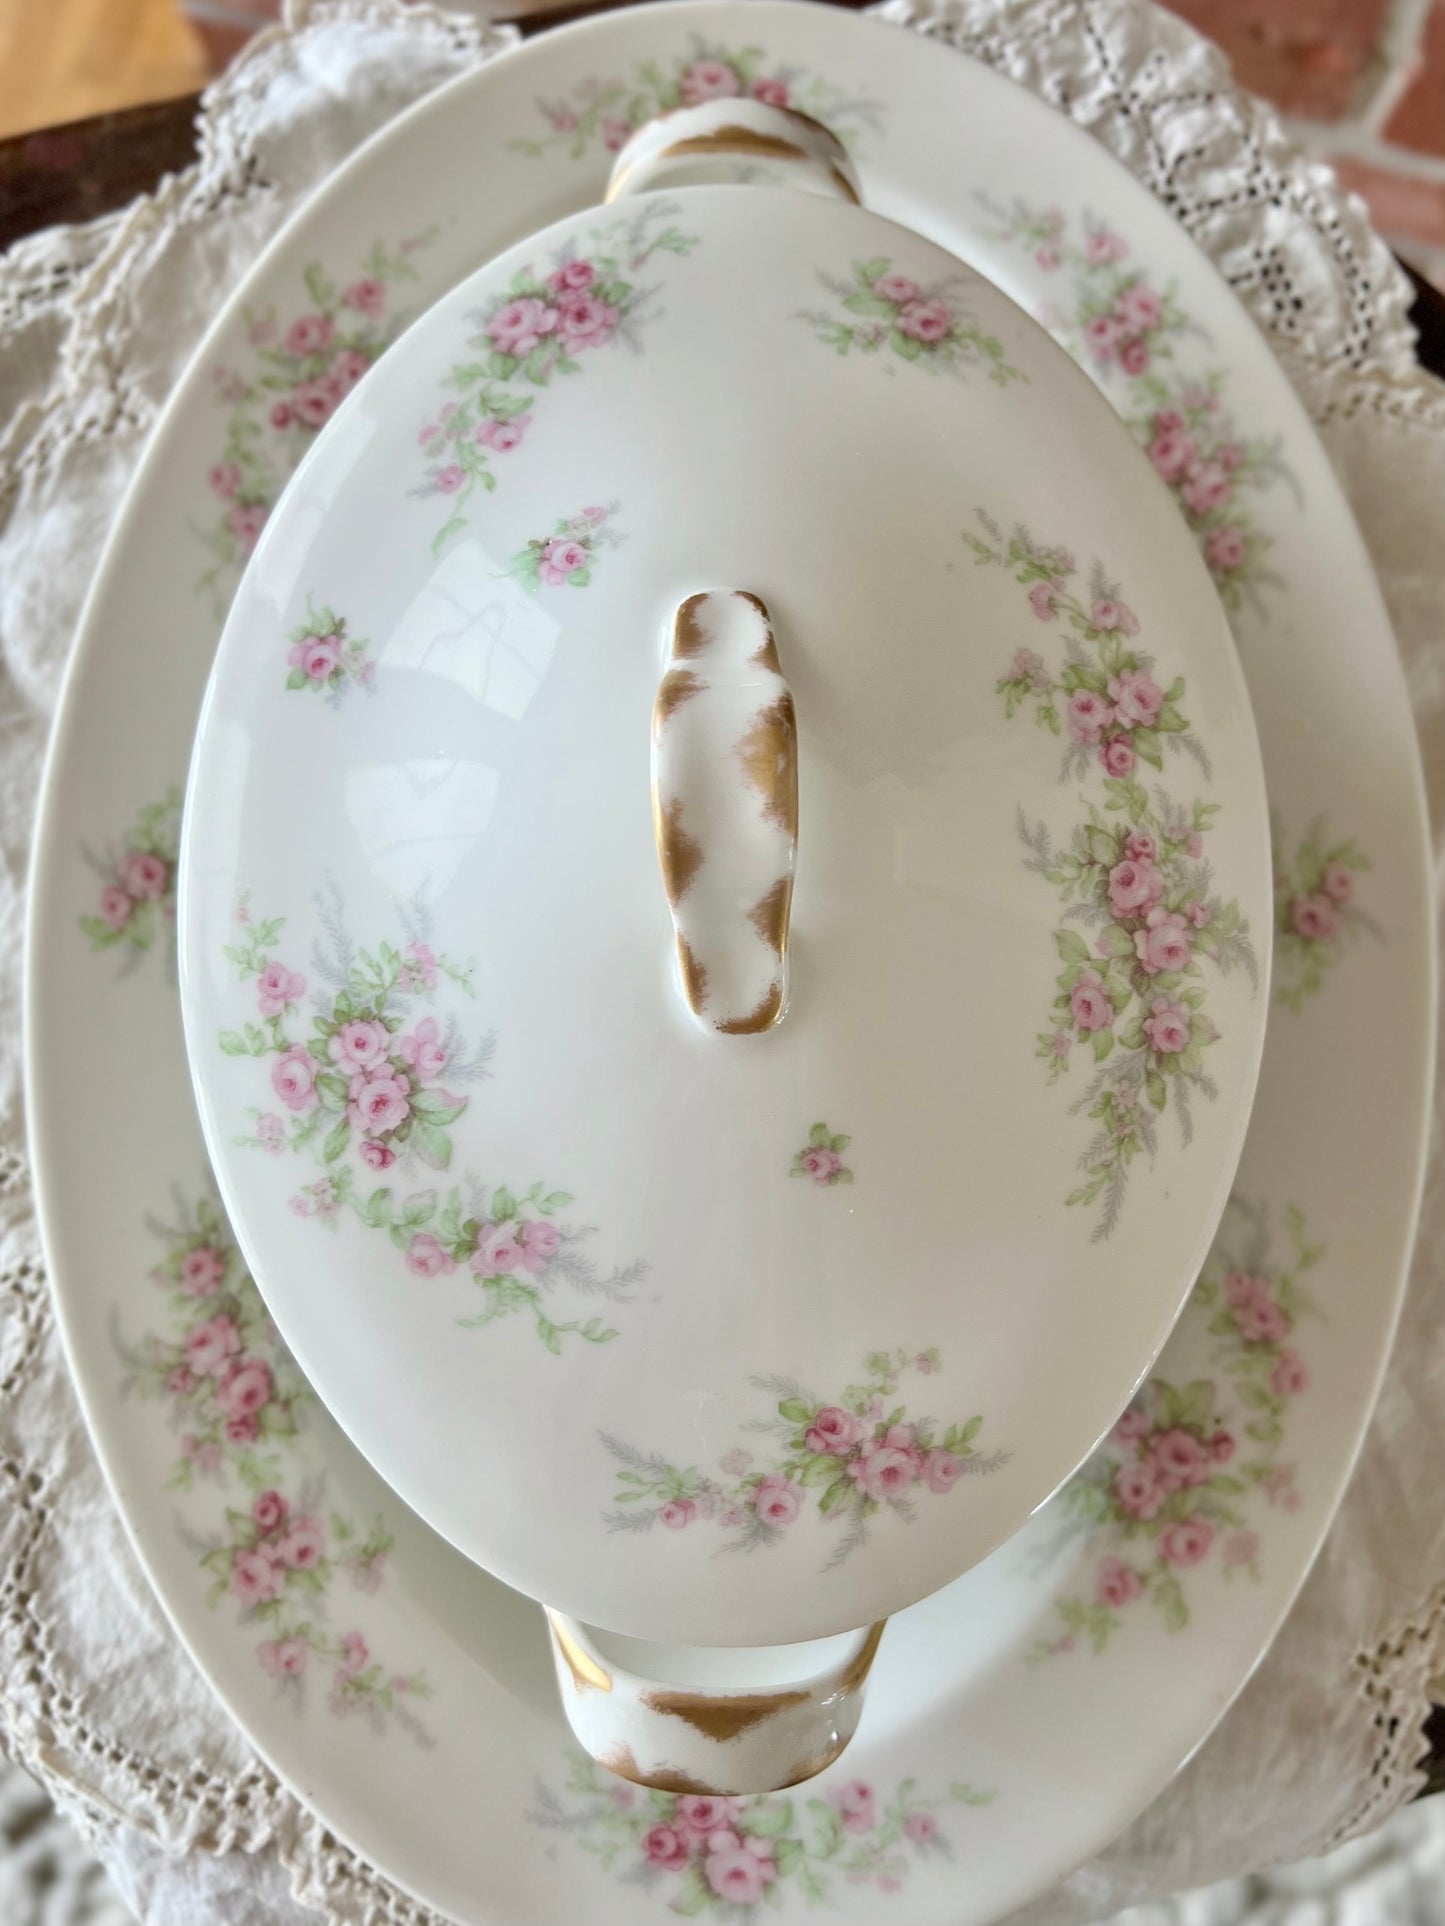 Antique Theodore Haviland Covered Dish, Limoges France